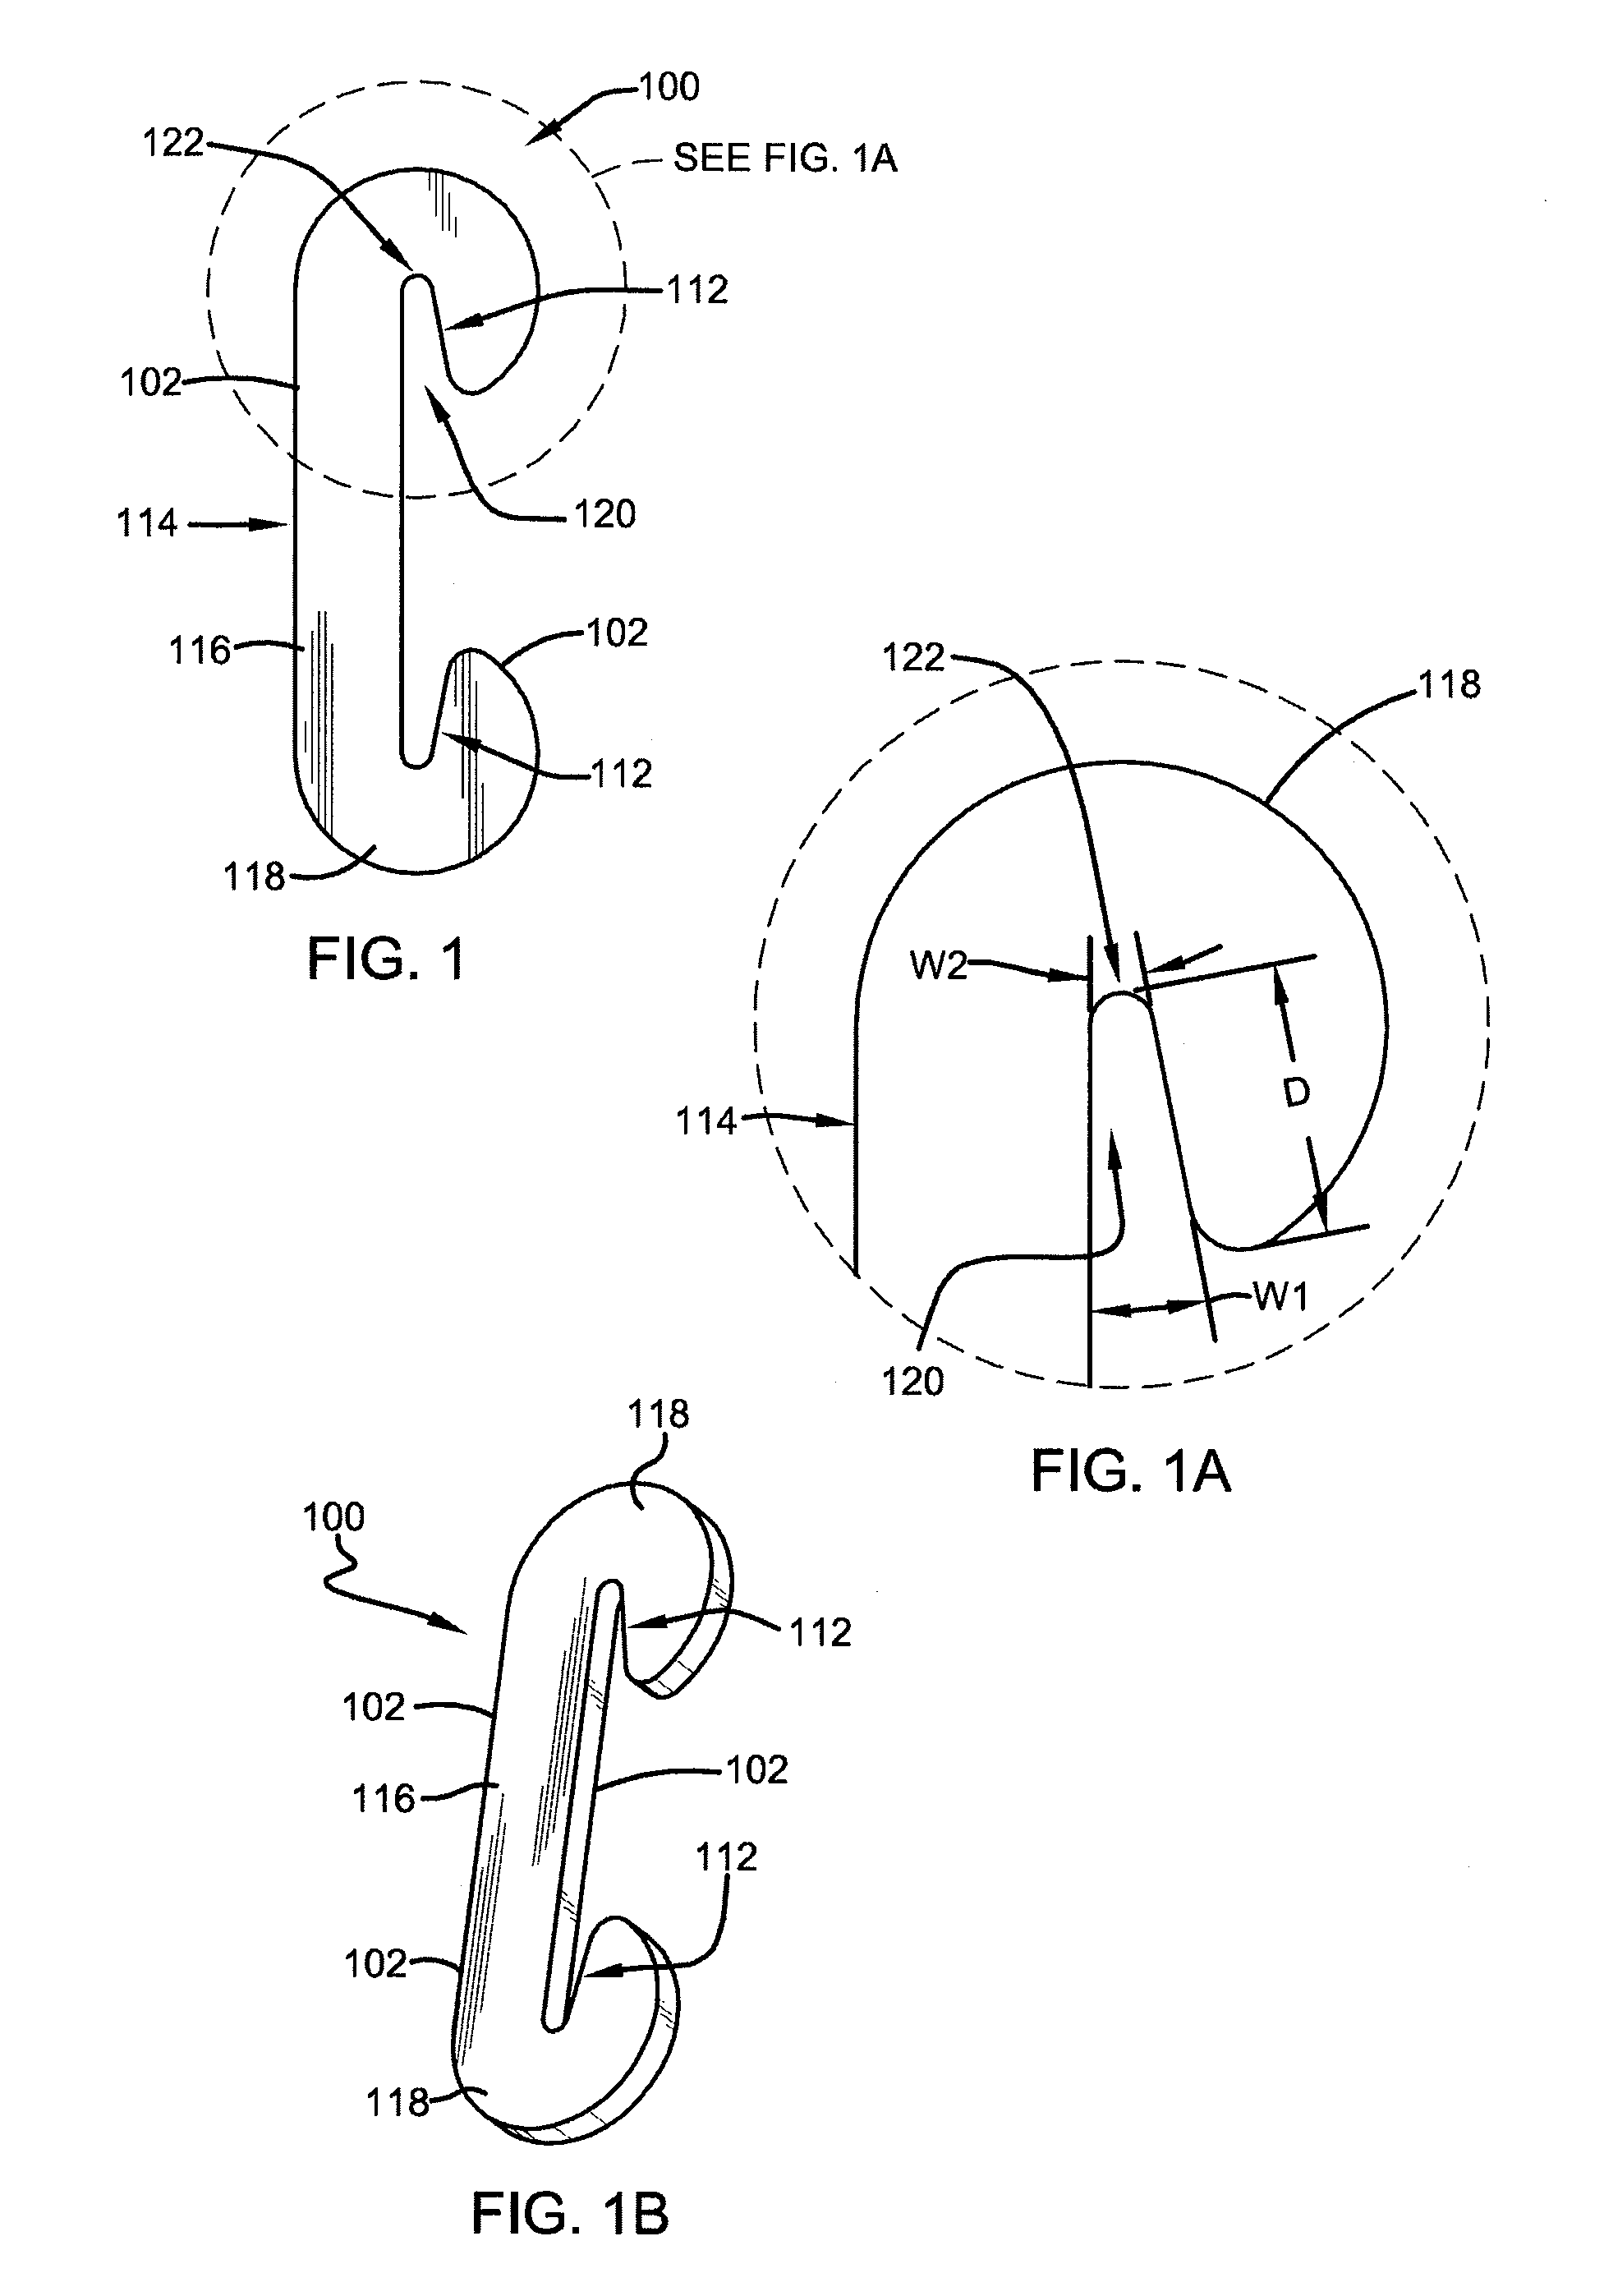 Line connector apparatus and method